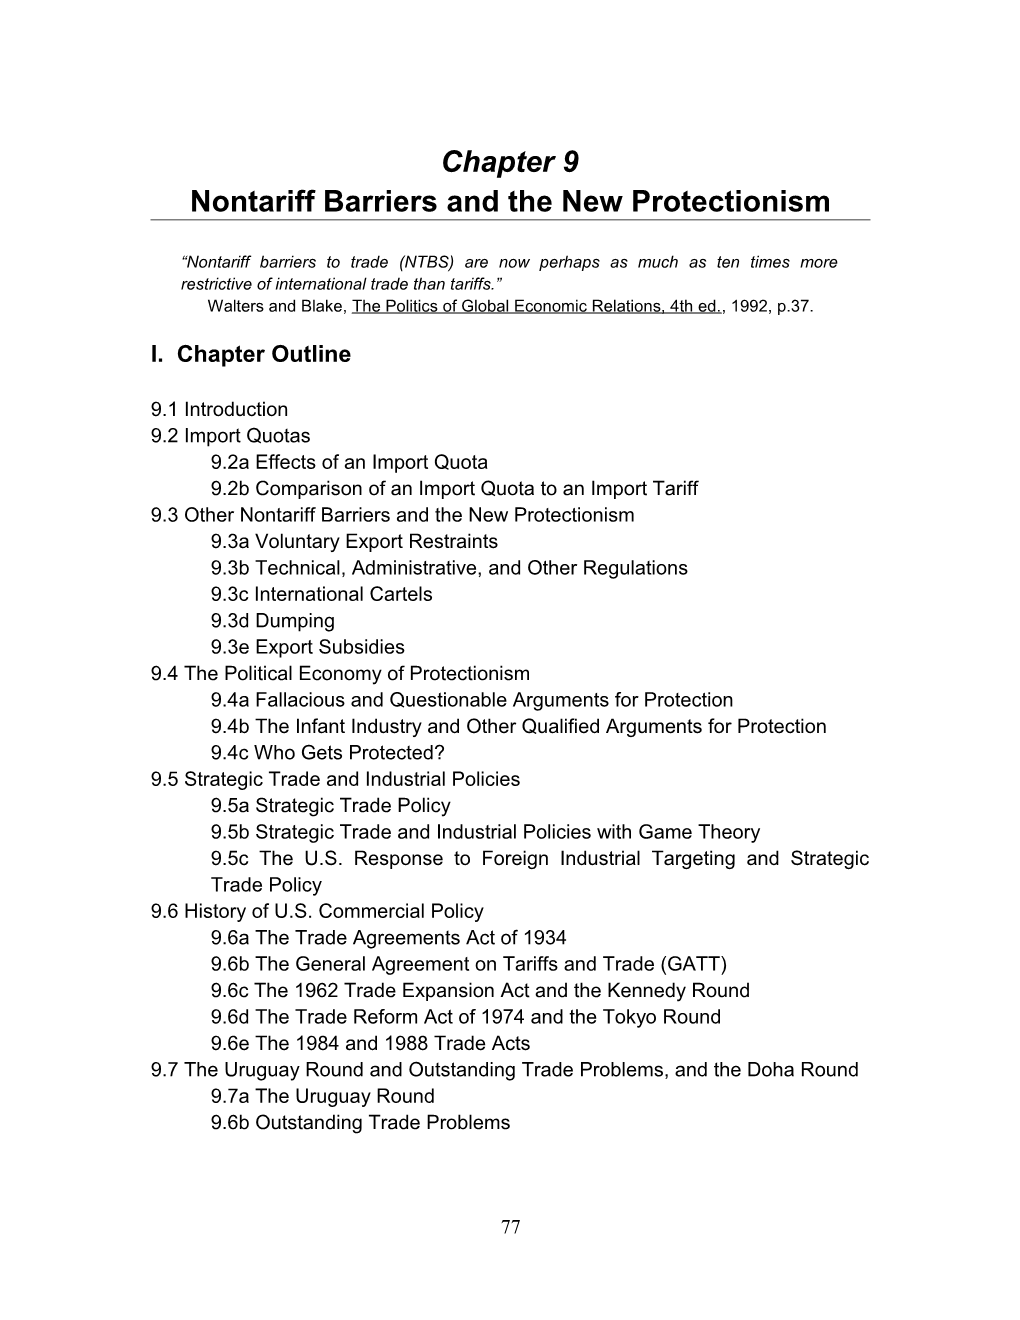 Nontariff Barriers and the New Protectionism